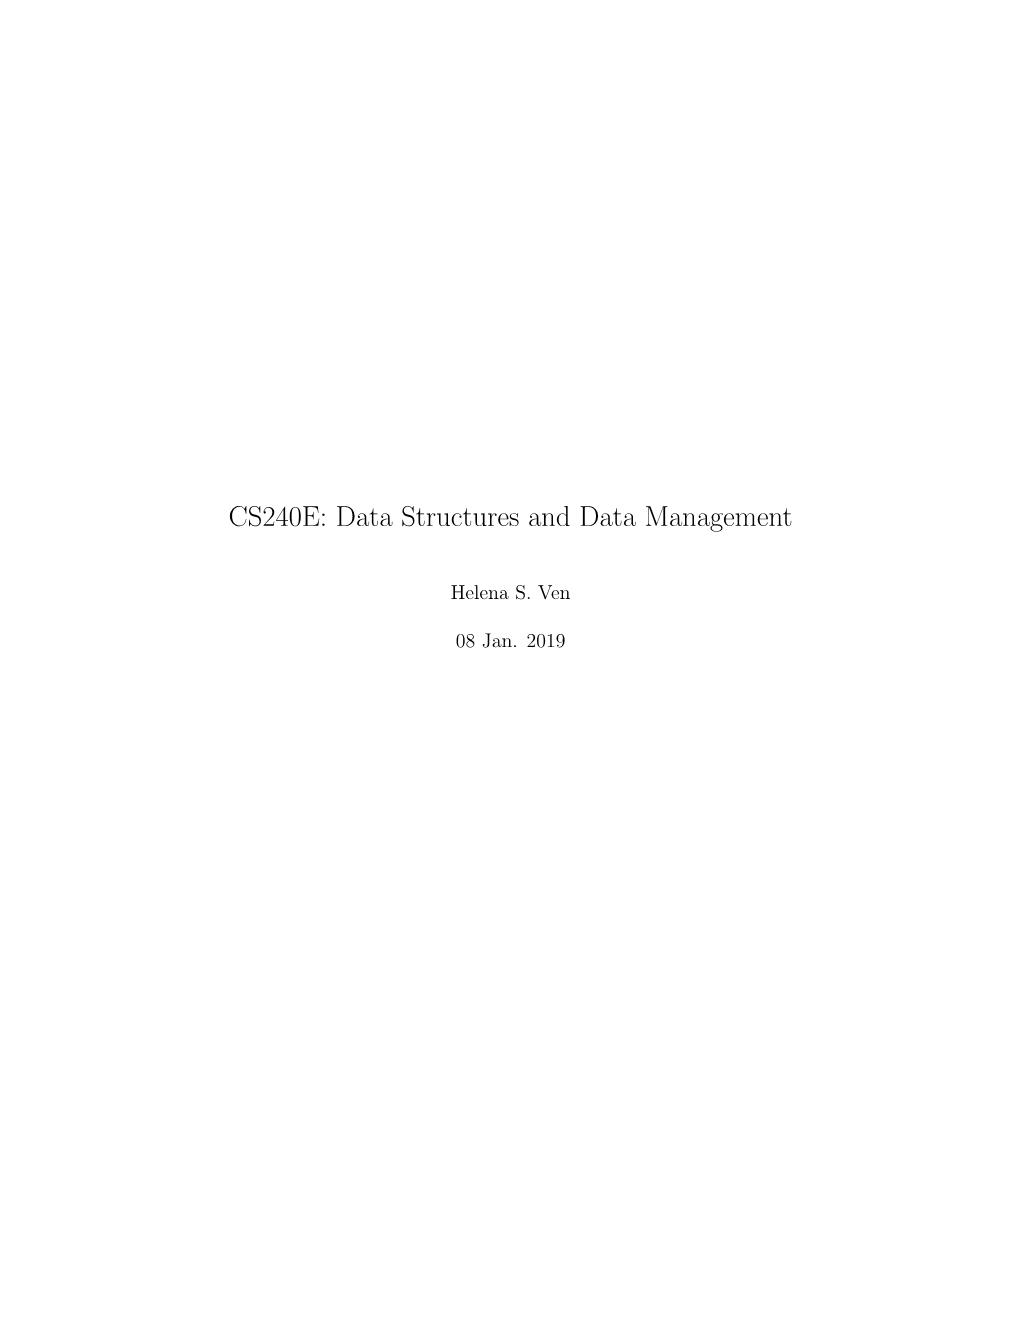 CS240E: Data Structures and Data Management